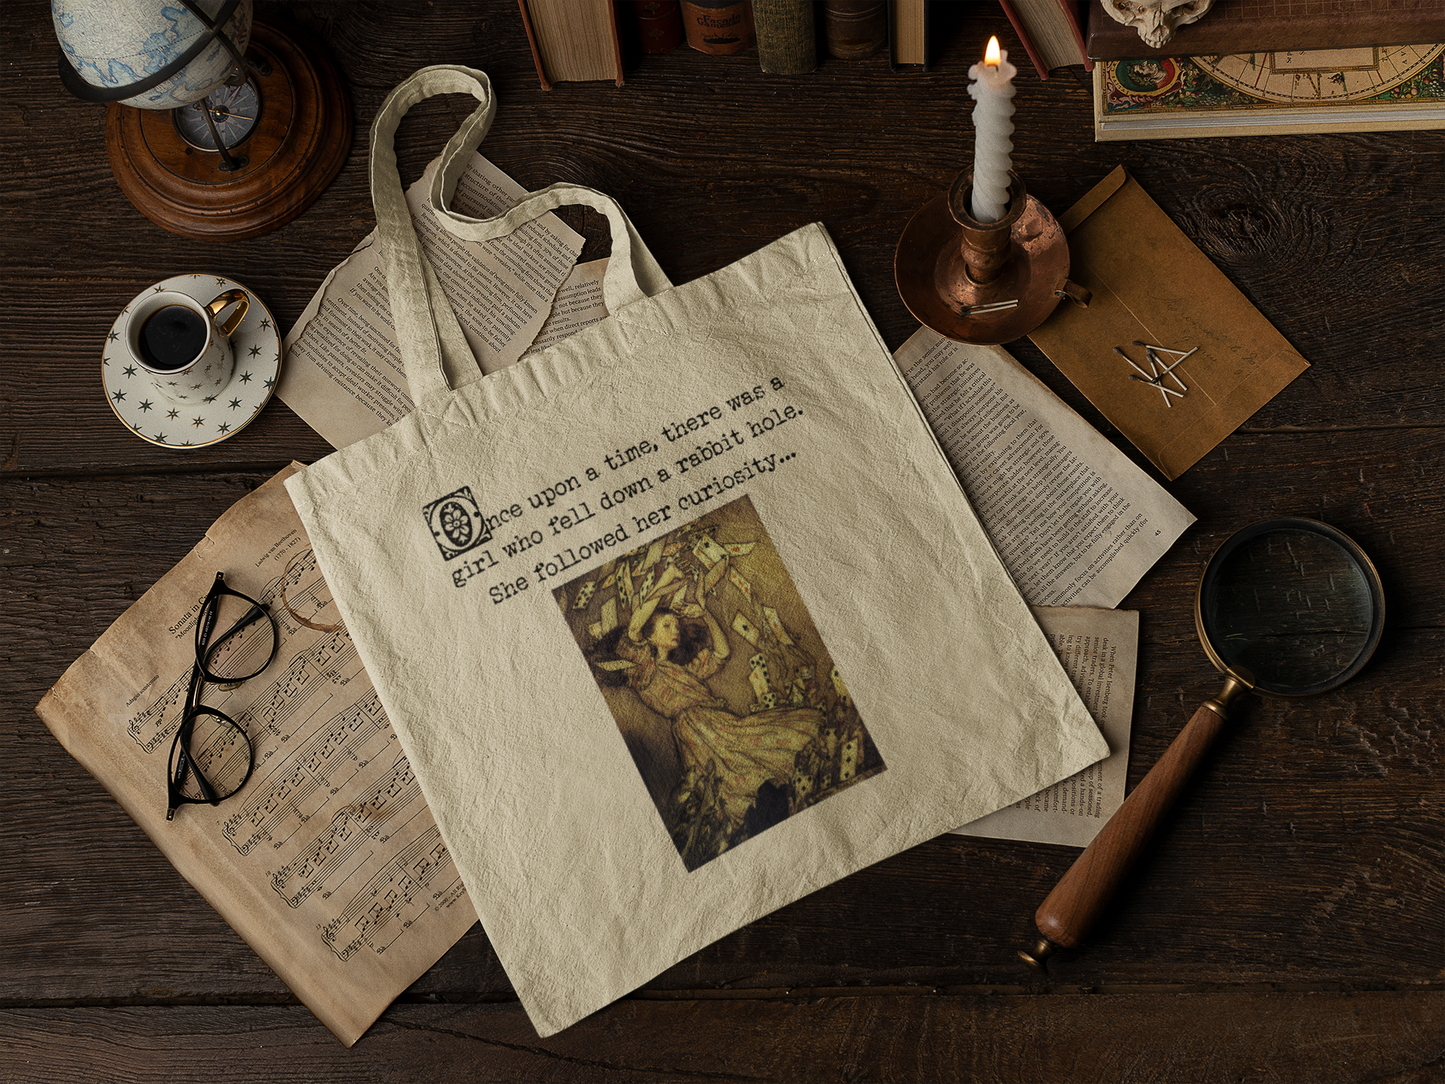 And Learned to Trust Her Instincts - Alice's Adventures in Wonderland Classic Fairytale Vintage Illustration Cotton Canvas Tote Bag